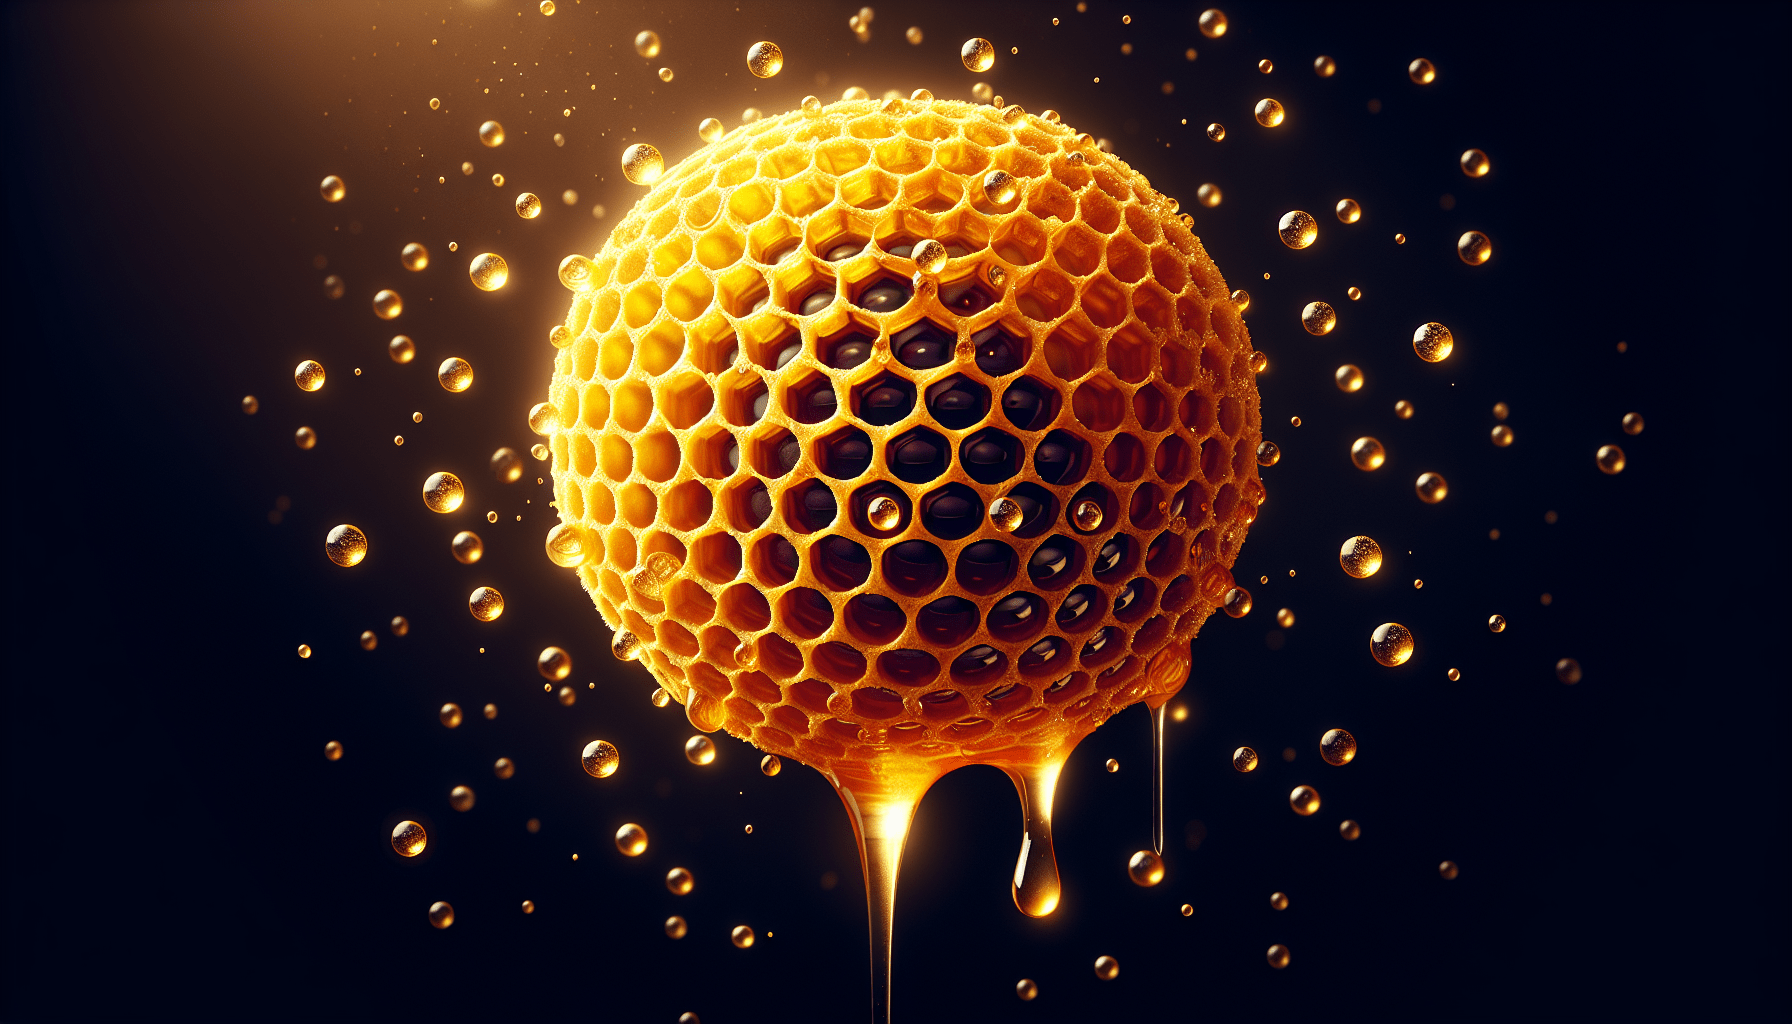 9 are there any potential risks or side effects associated with consuming honey